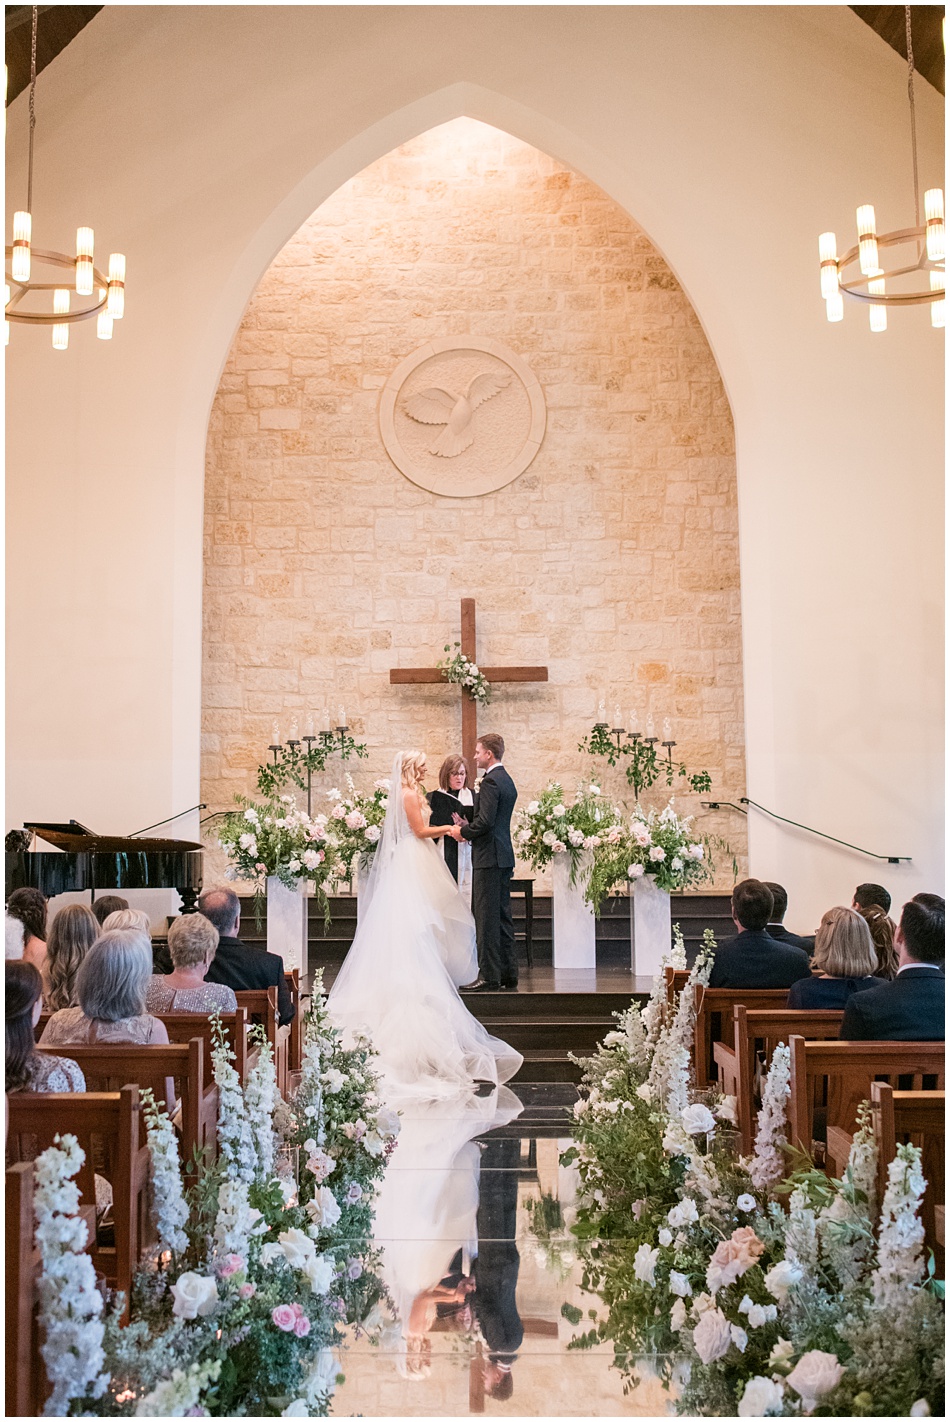 Smith Family Chapel Wedding with Mirror Aisle Runner